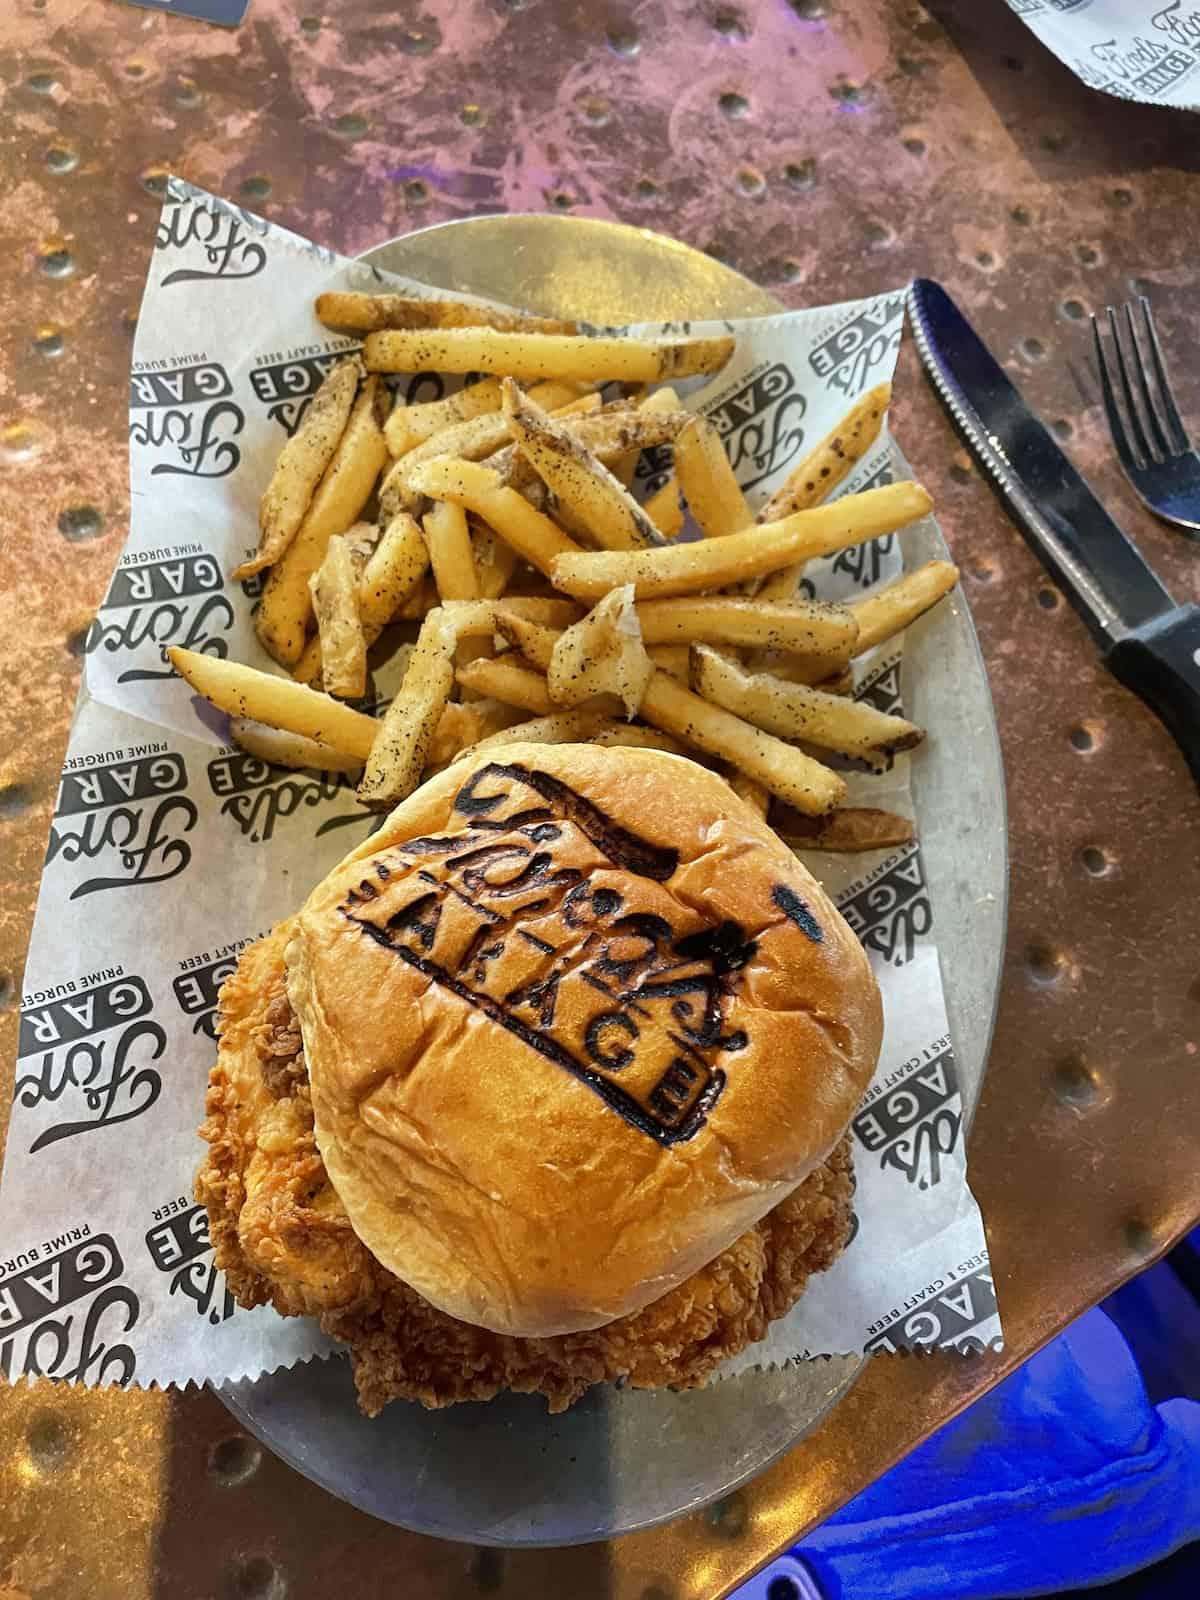 Fried chicken on a bun with Ford's Garage seared into it.